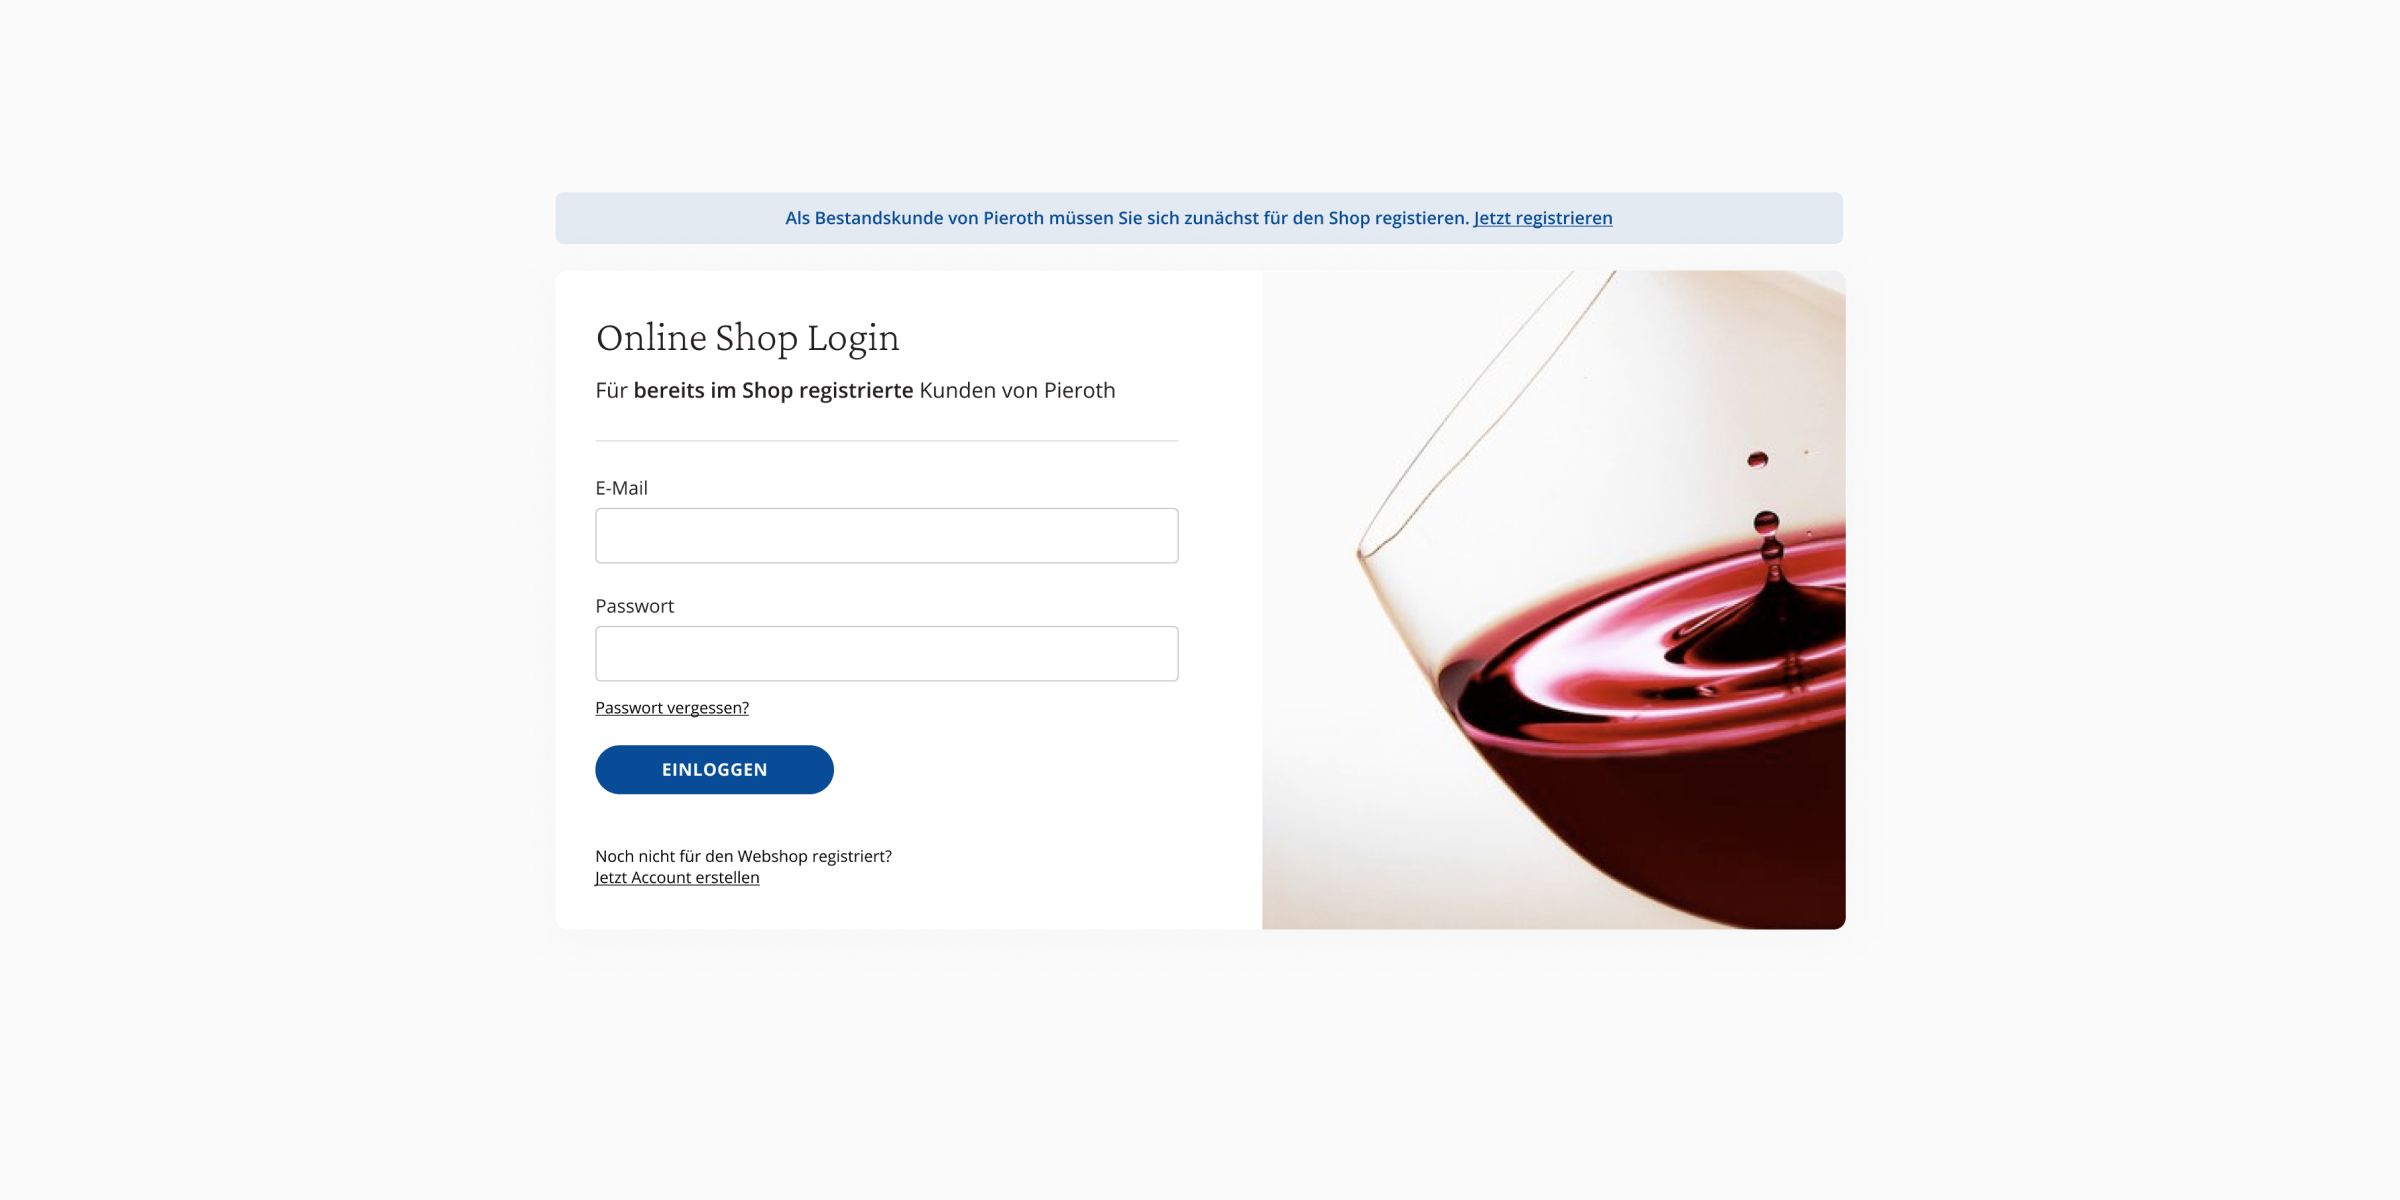 A Traditional Wine Distributor with a Full-bodied Modern Online Shop